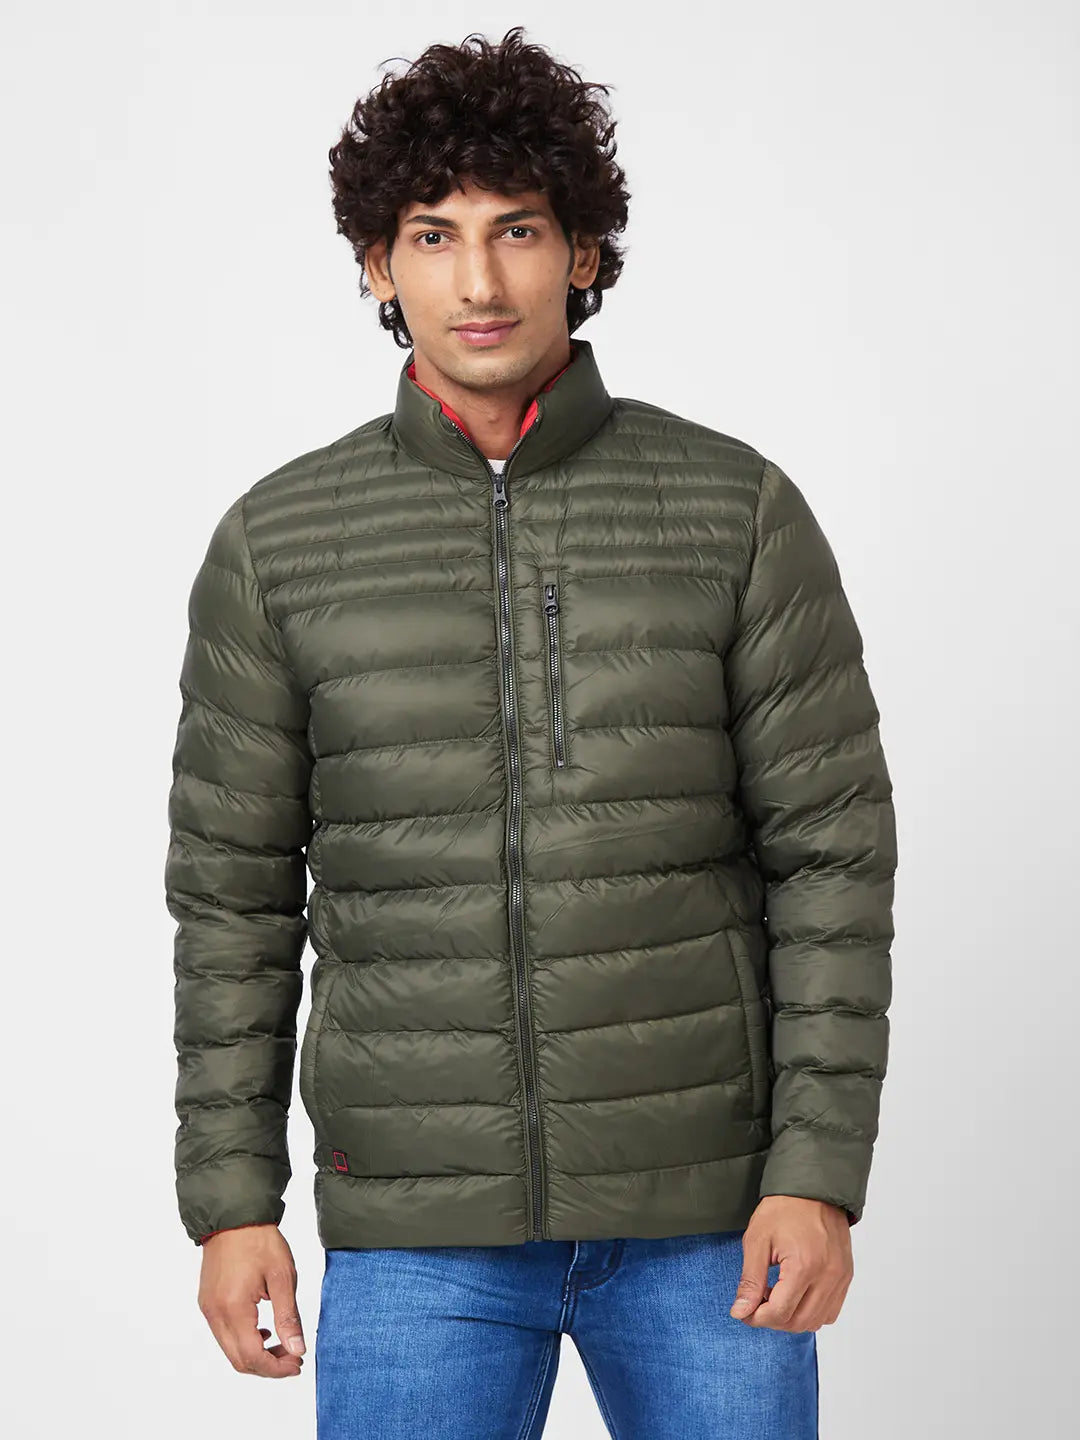 MEN'S PACKABLE PUFFER JACKET WITH BRANDED PRINT ON NECK